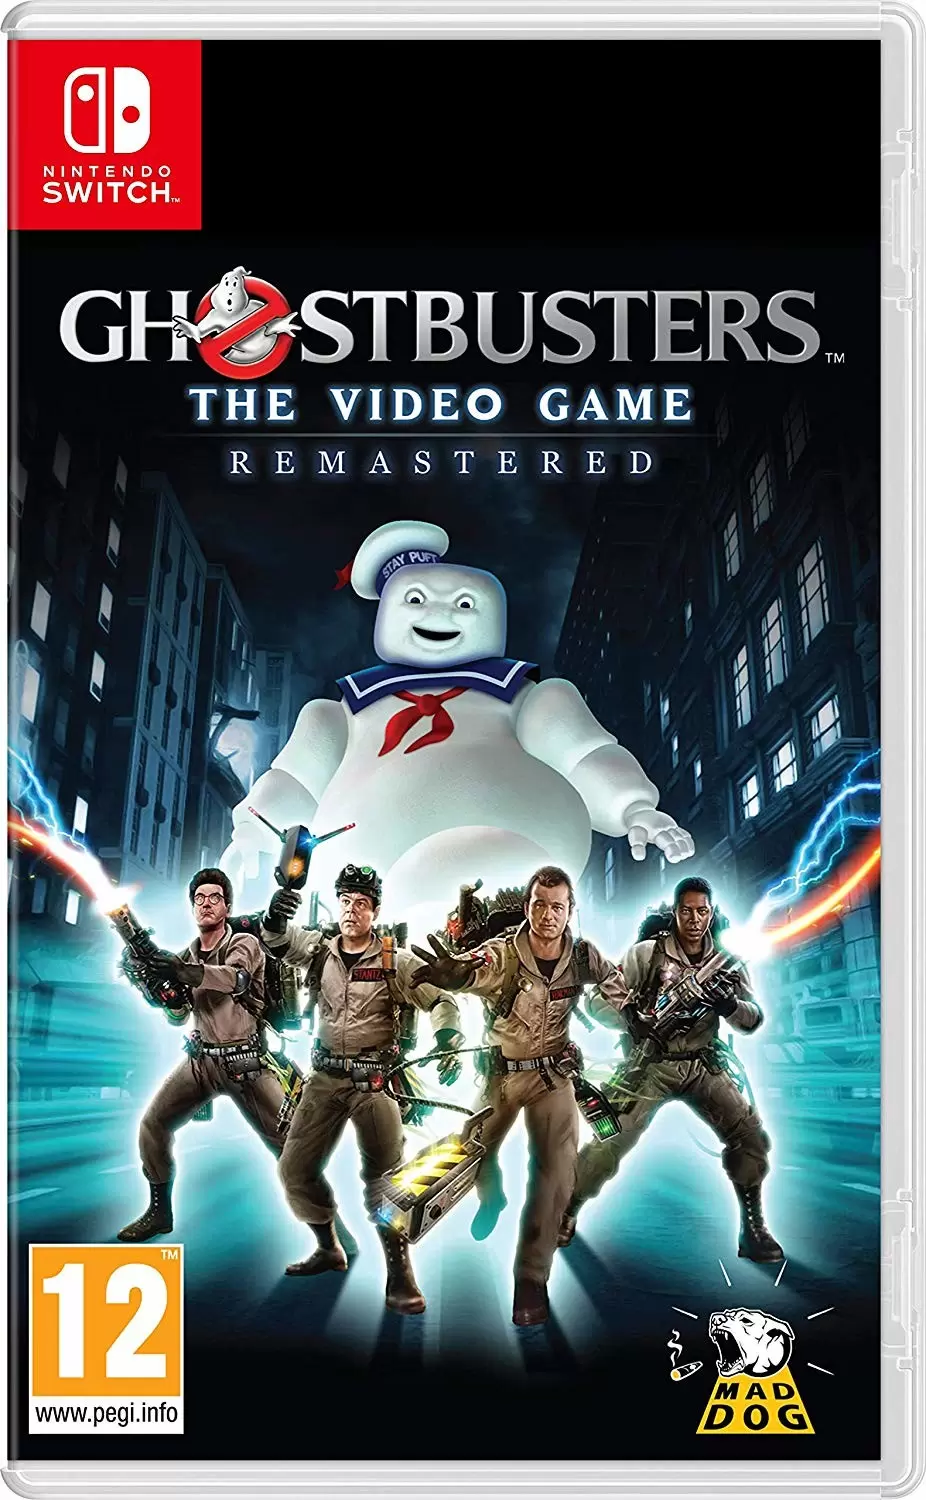 Nintendo Switch Games - Ghostbusters : The Video Game Remastered